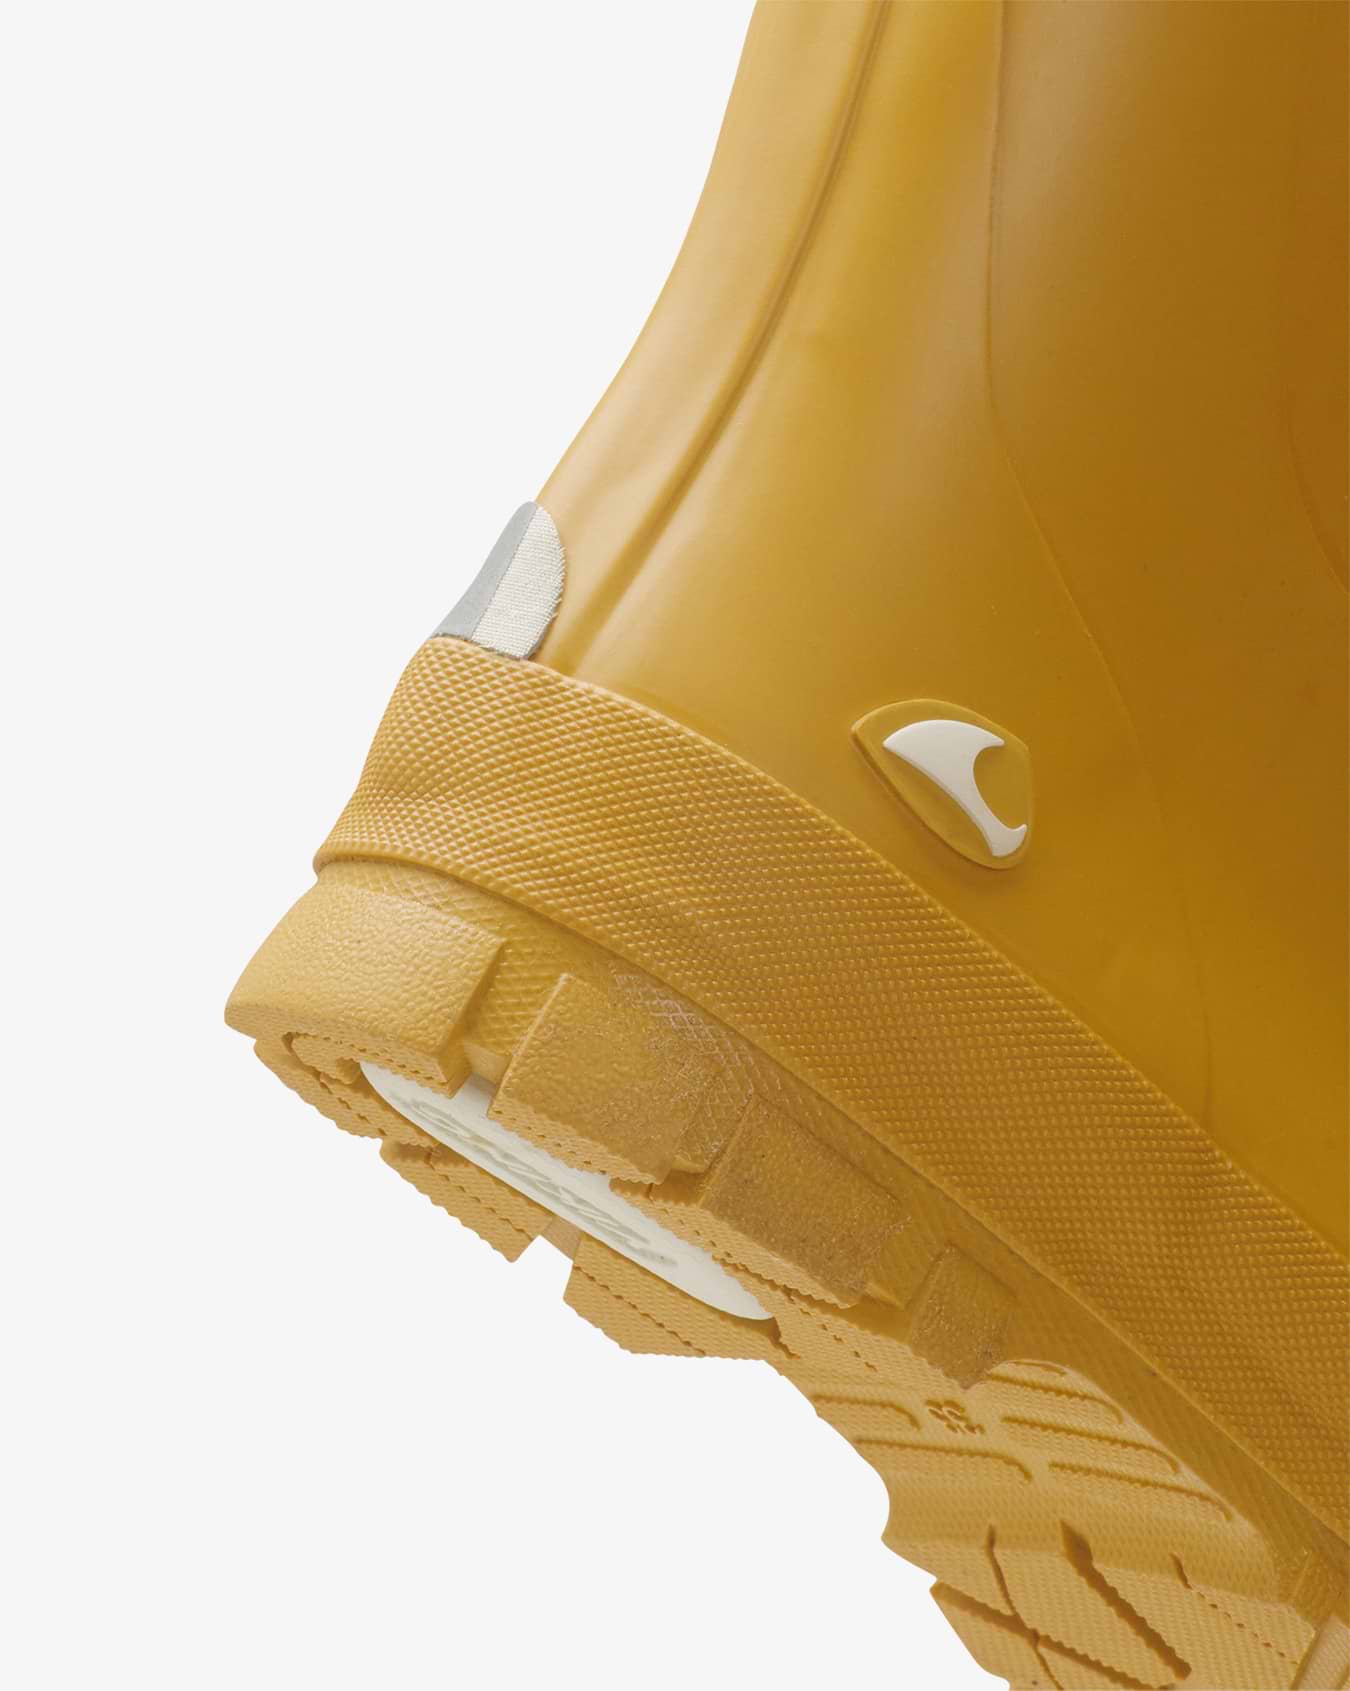 Jolly Thermo Mustard Rubber Boot